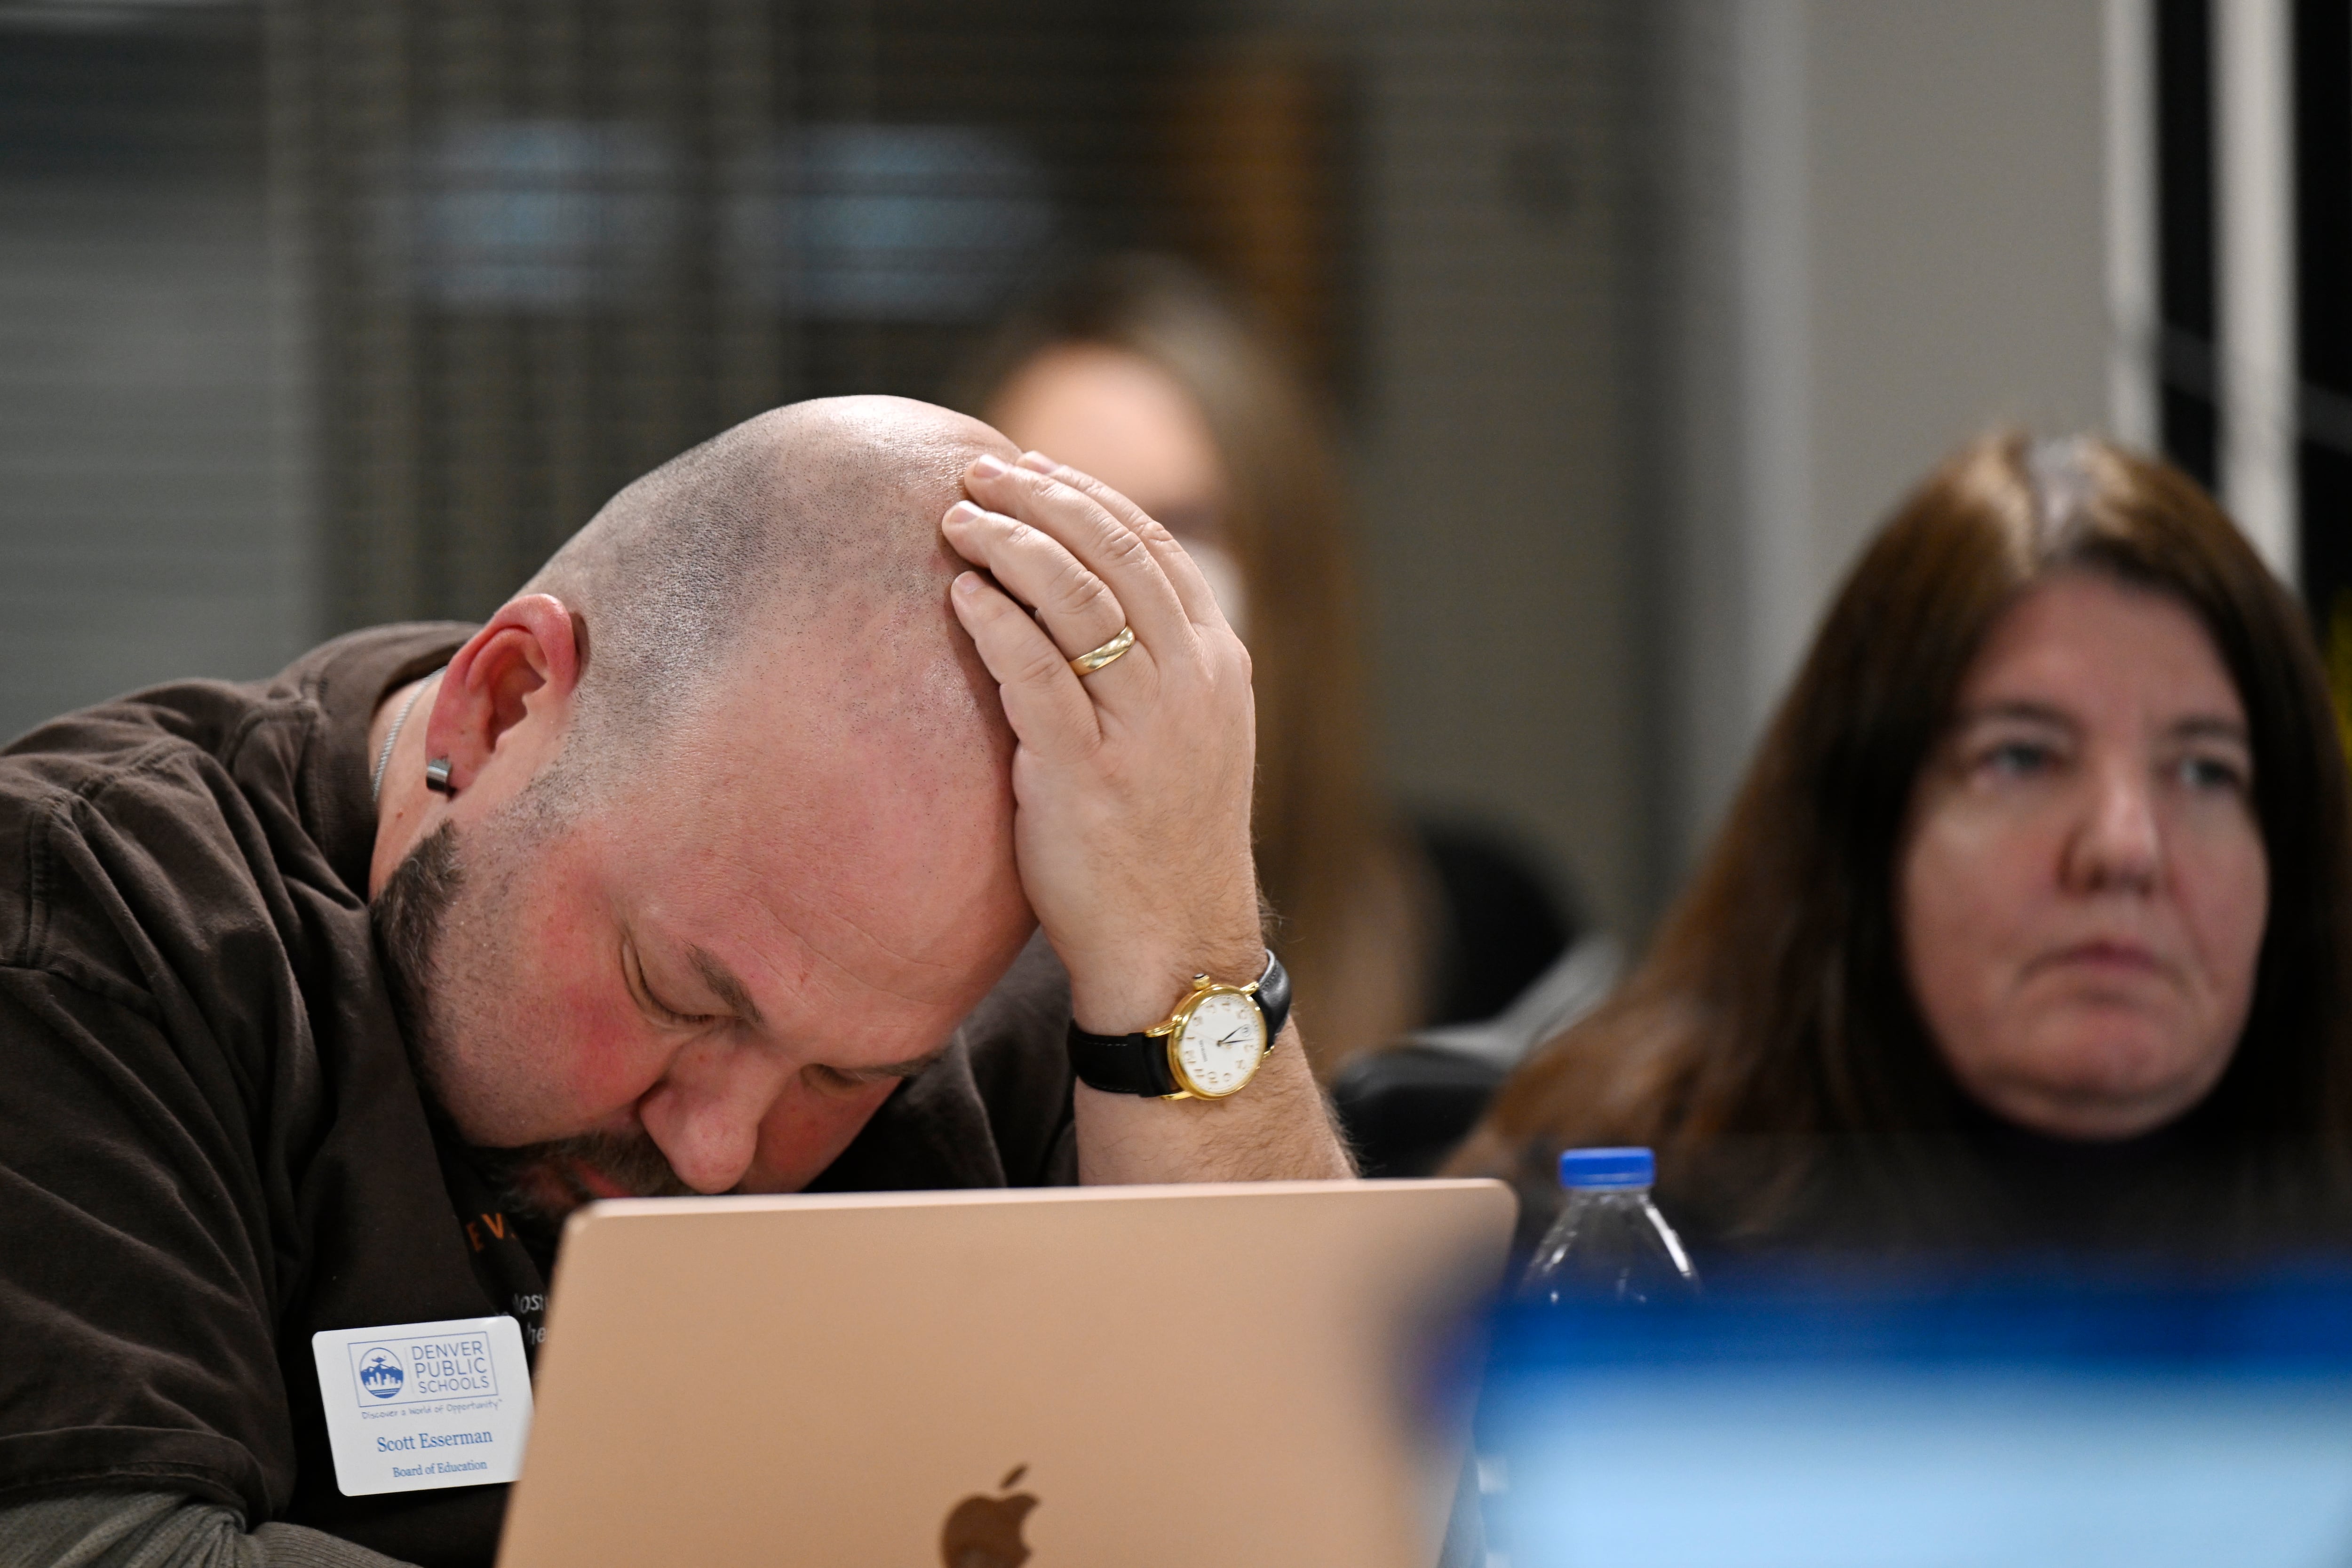 A man holds his head in dismay during a meeting.